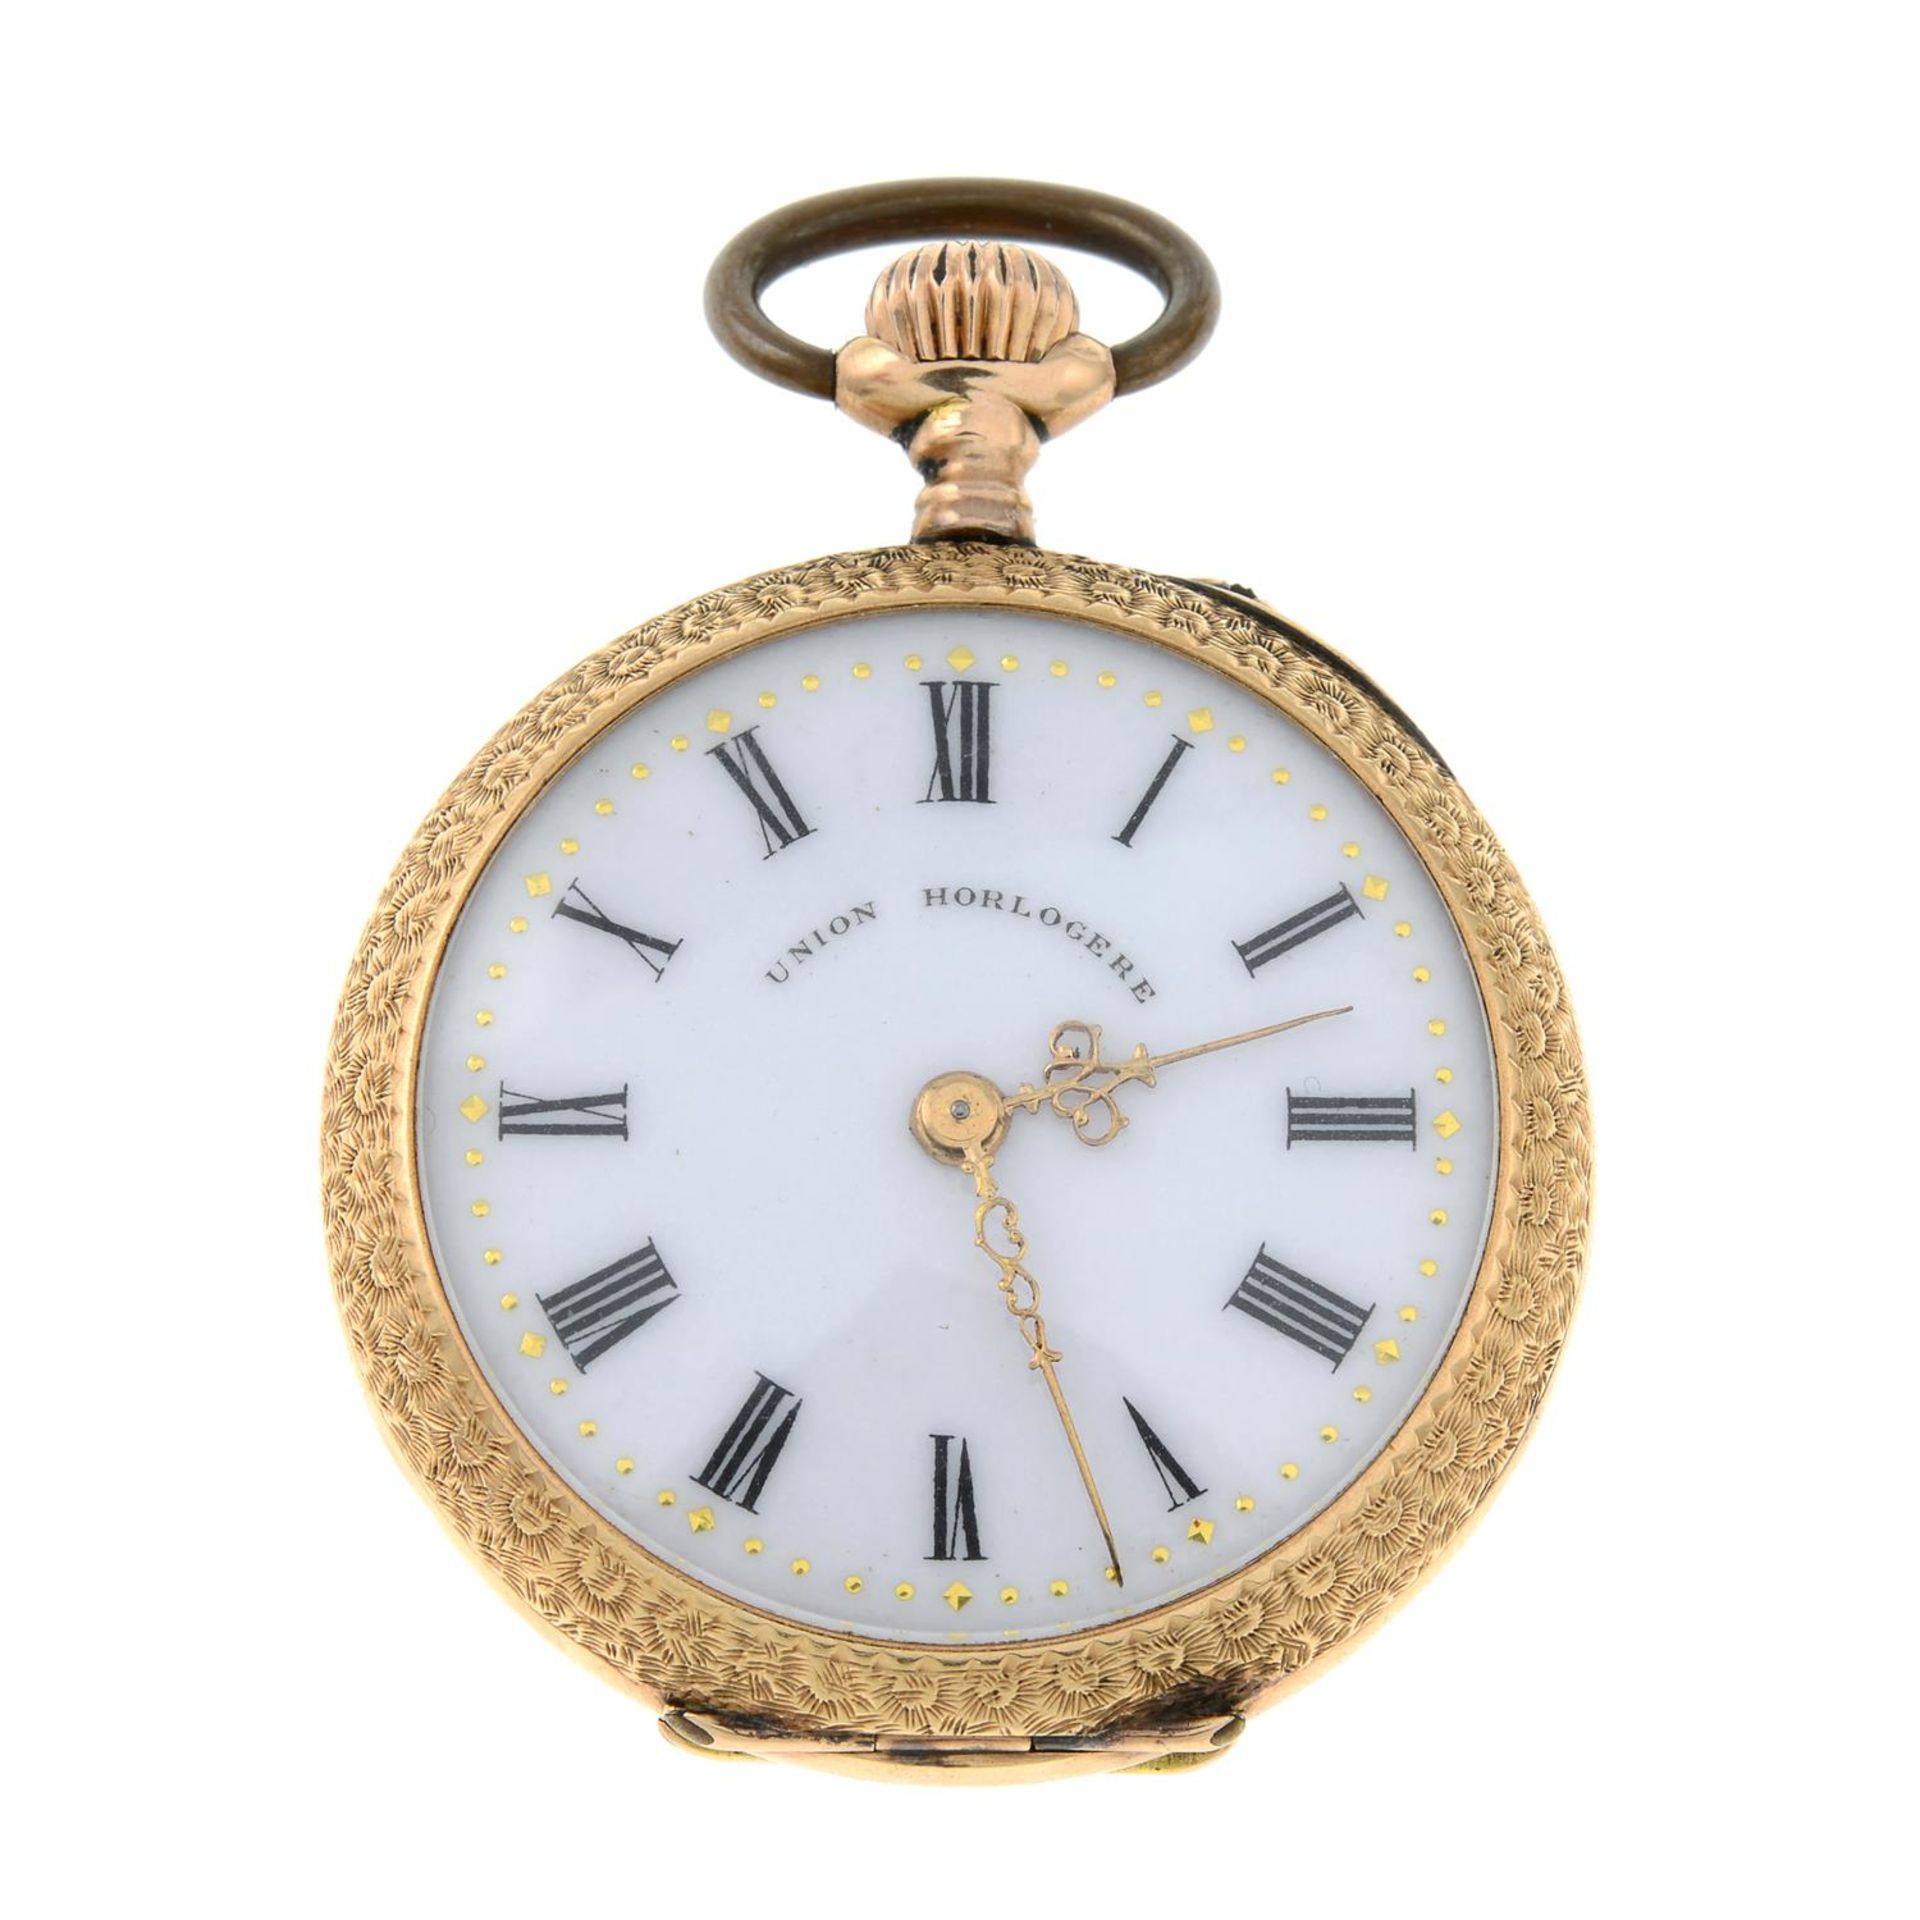 A 14ct gold Lady's pocket watch, with floral enamel reverse. - Image 2 of 2